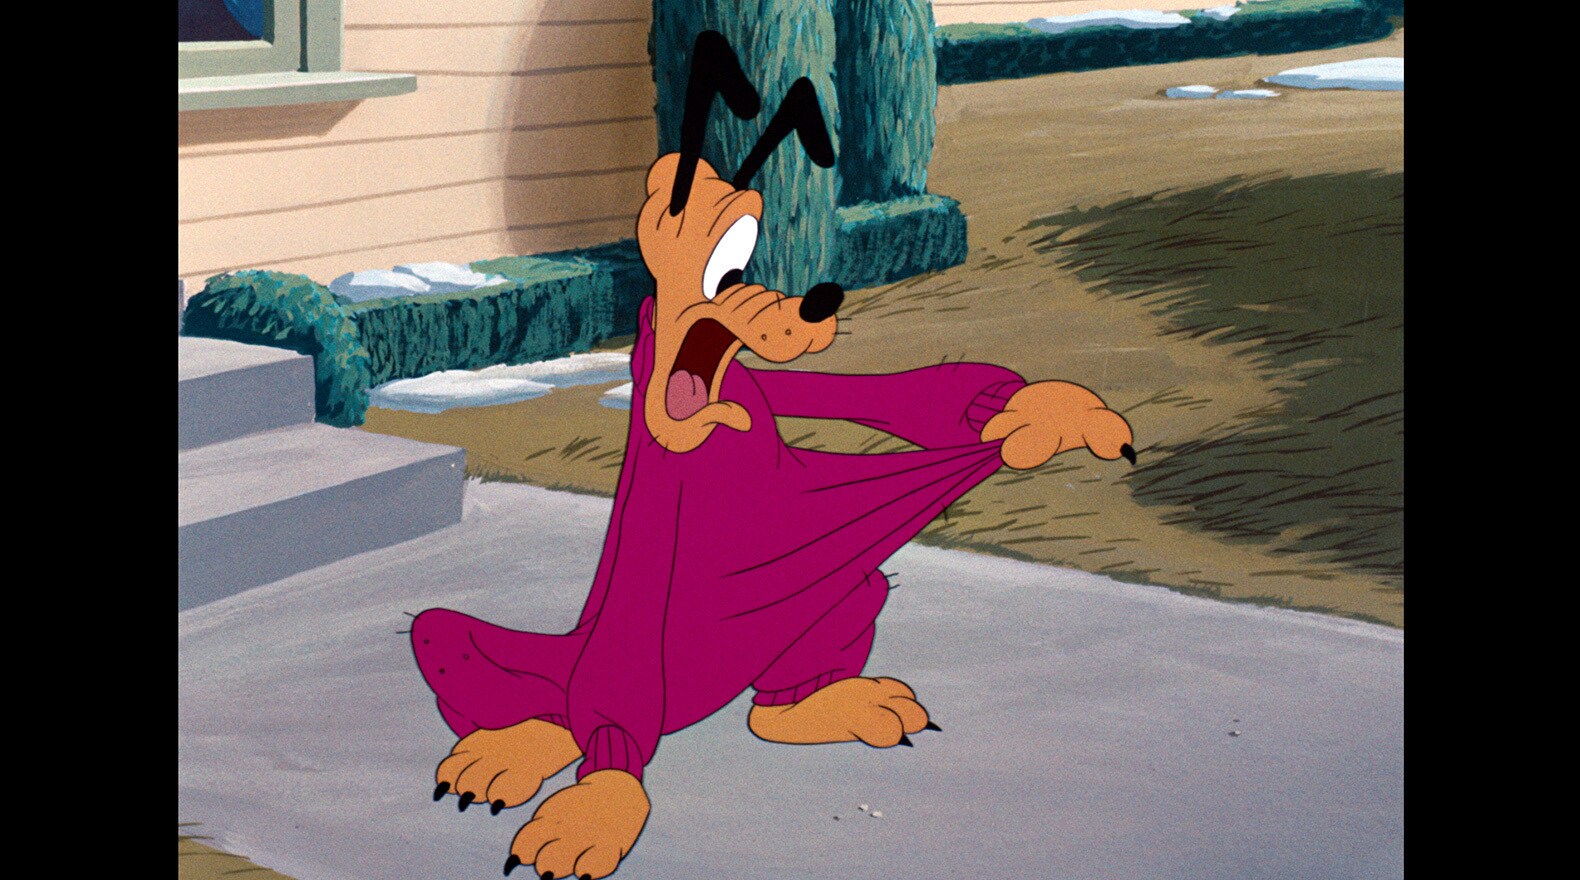 When Minnie knits Pluto a pink sweater, he can’t get rid of it.